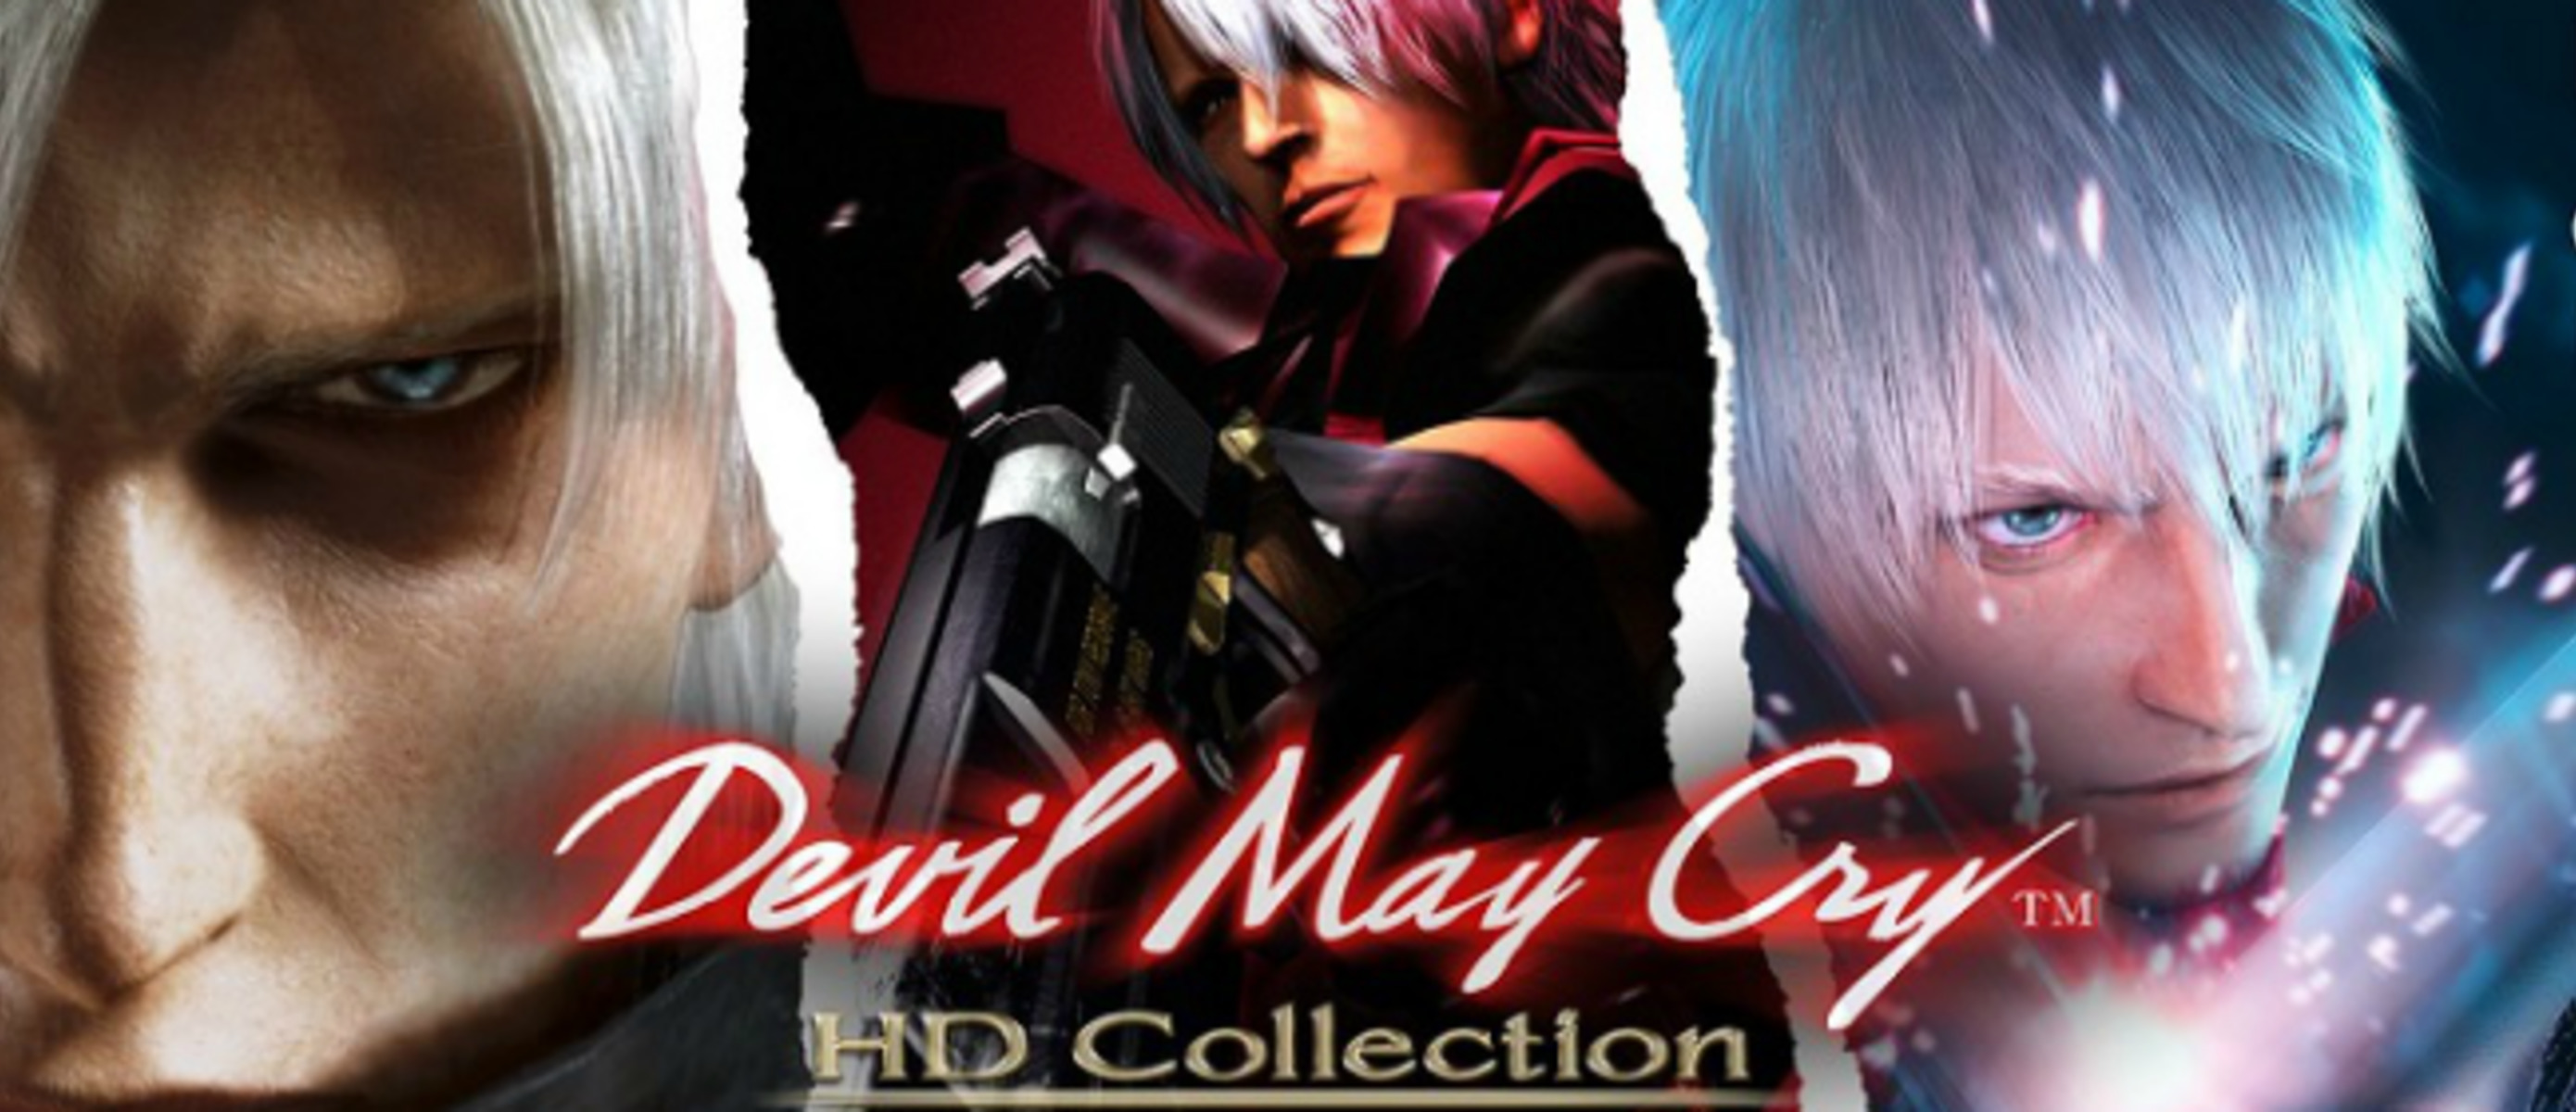 Devil may cry collection купить. Devil May Cry 1. Devil May Cry 2001.